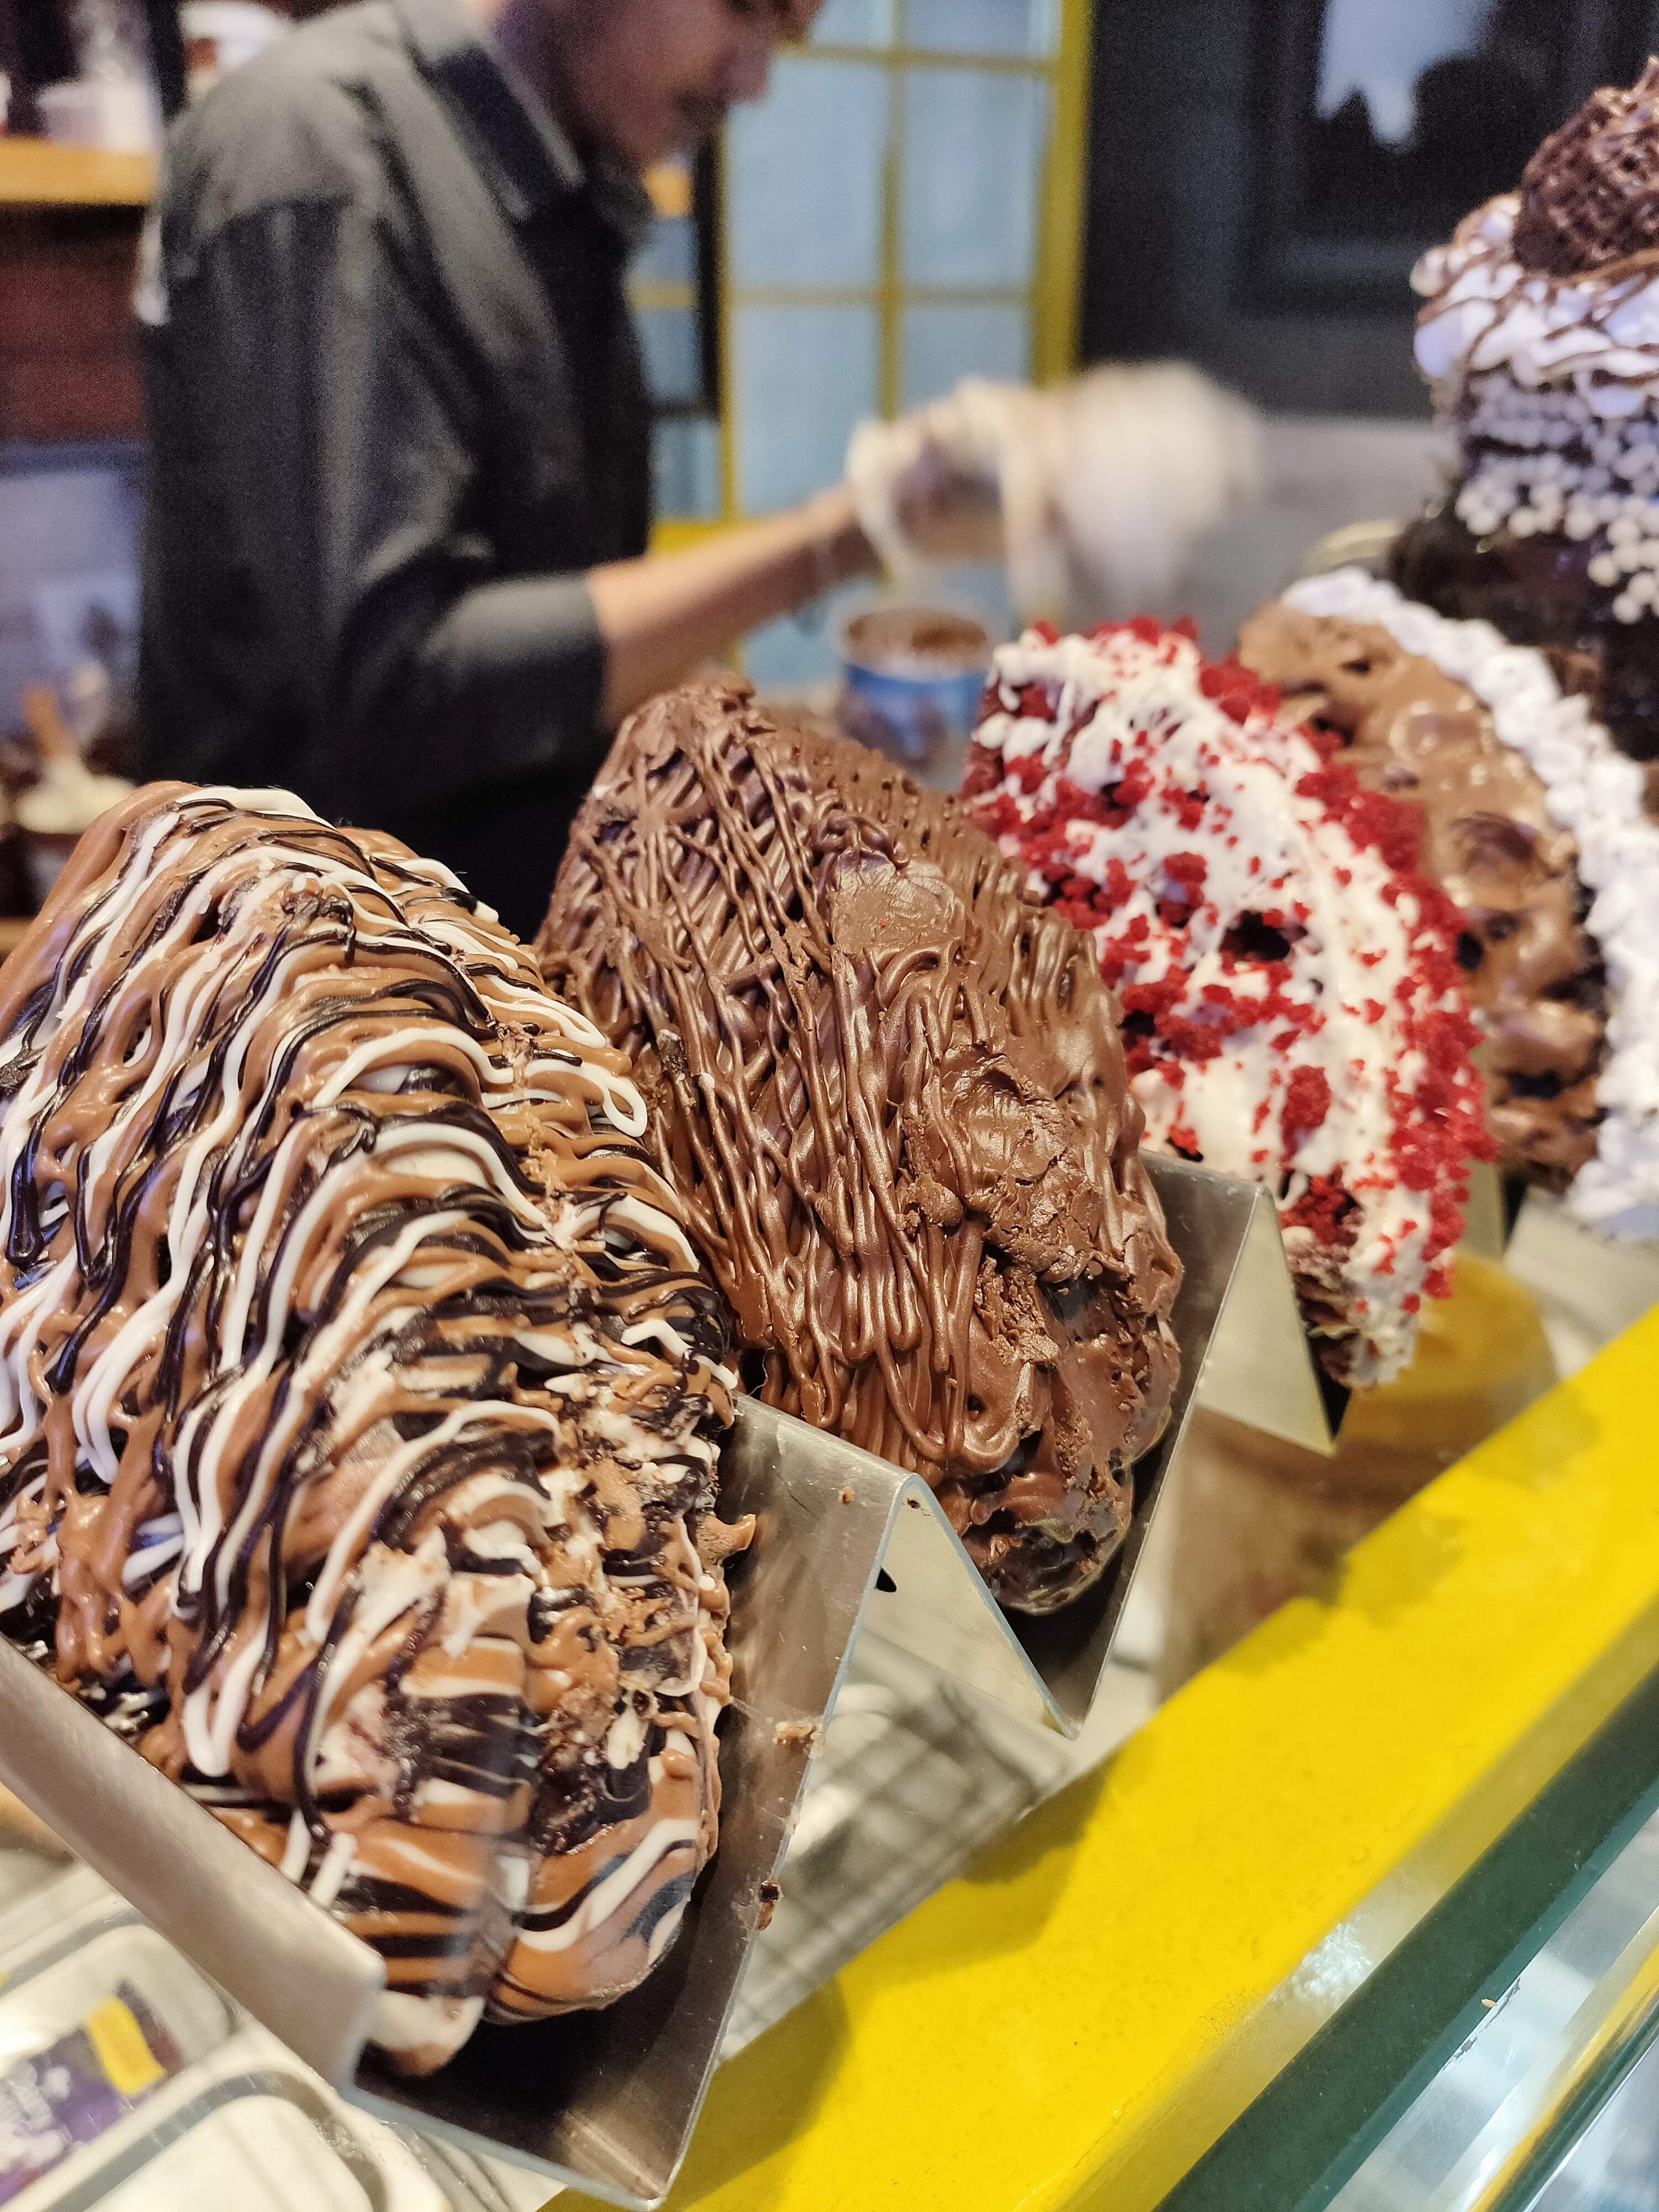 Waffles, Ice Creams, Freakshakes & More: This Outlet Has It All!